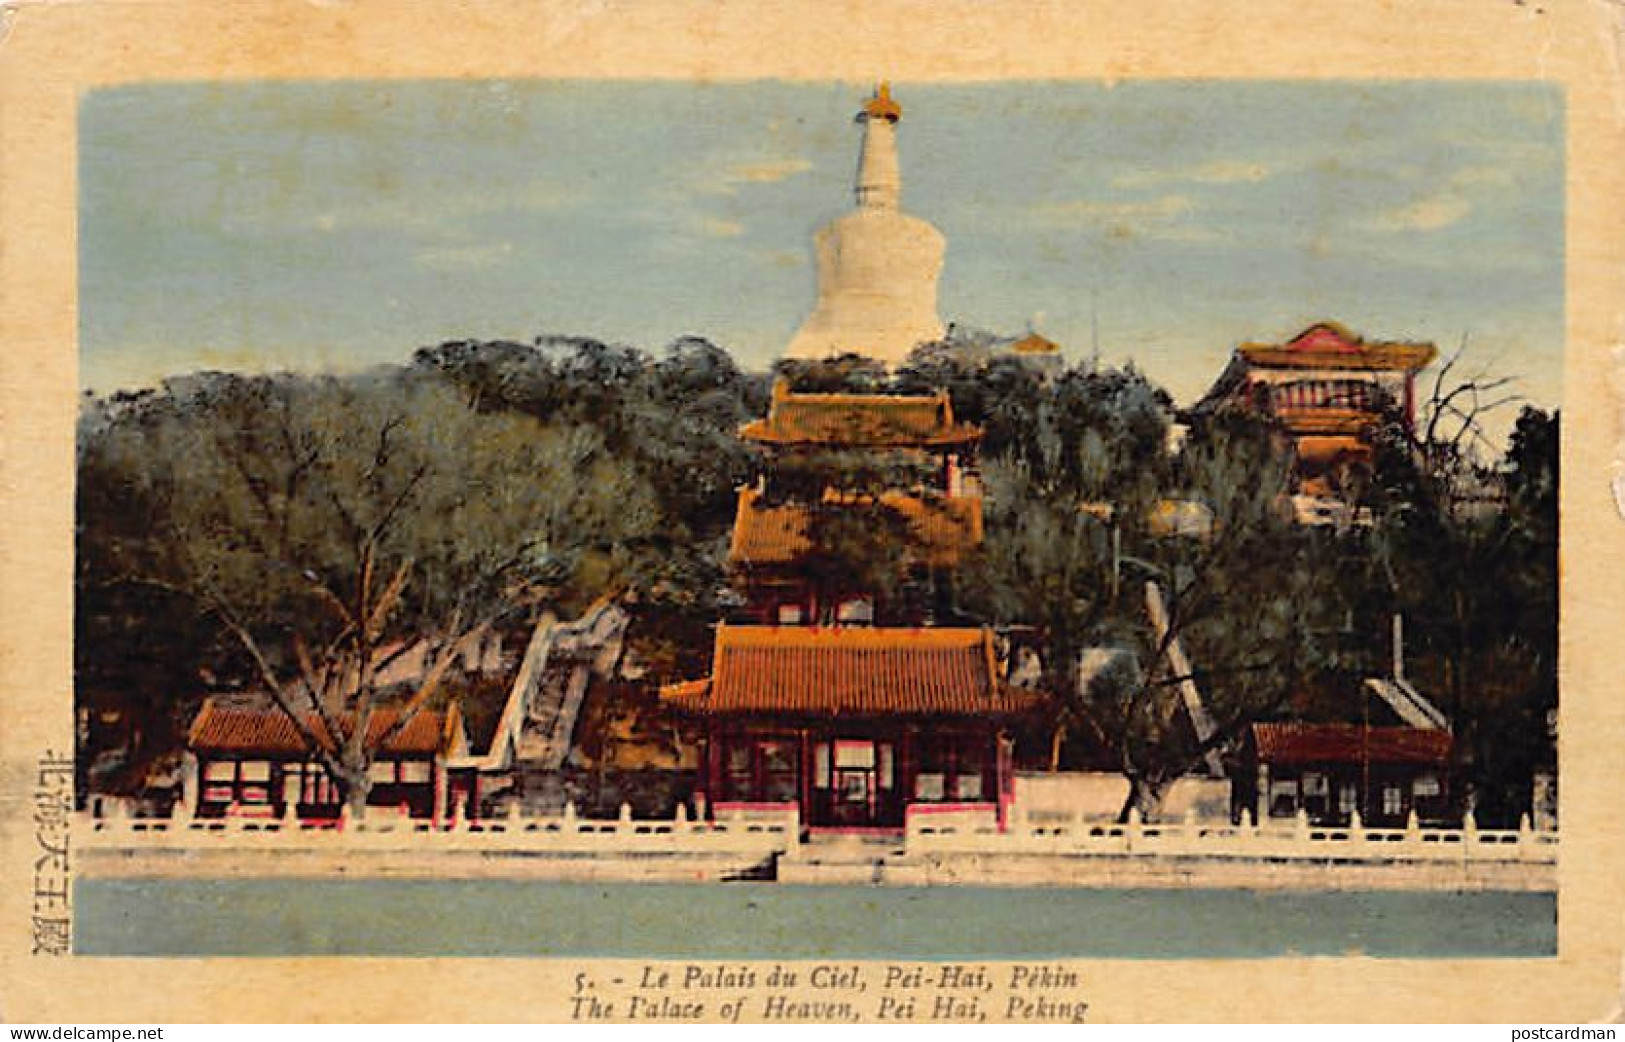 China - BEIJING - The Temple Of Heaven - Publ. Unknown 5 - China